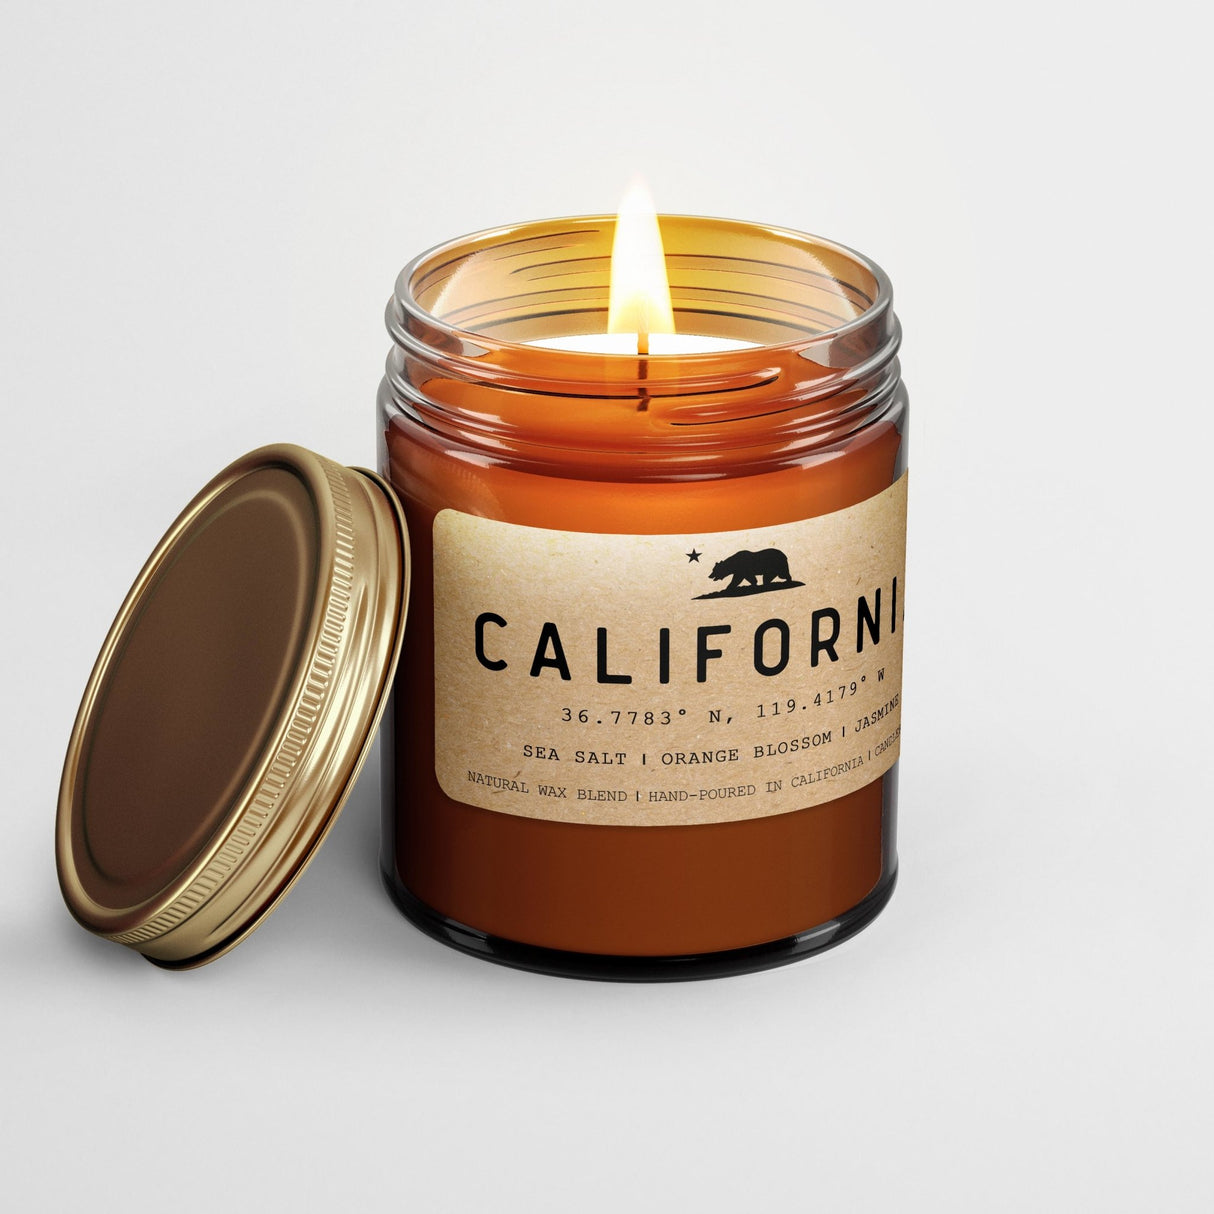 California Golden State Scented Natural Wax Candle